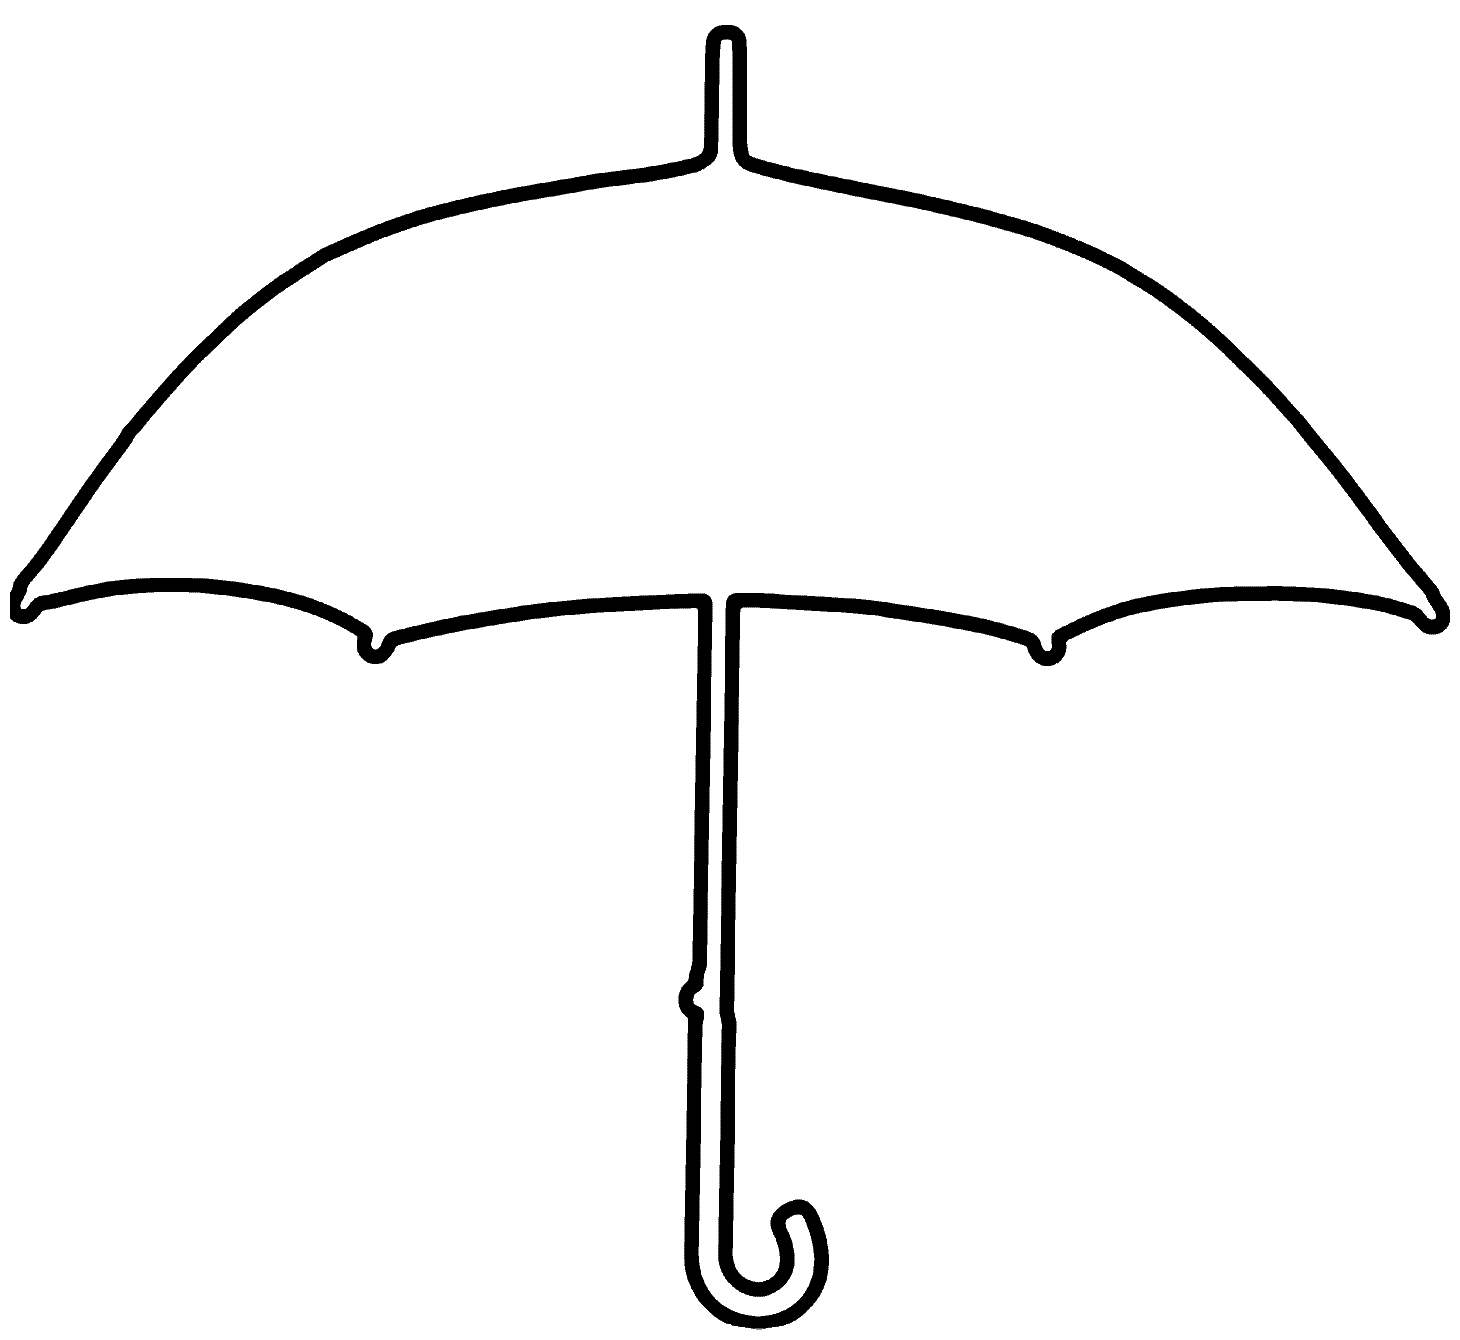 Picture Of An Umbrella To Color - ClipArt Best